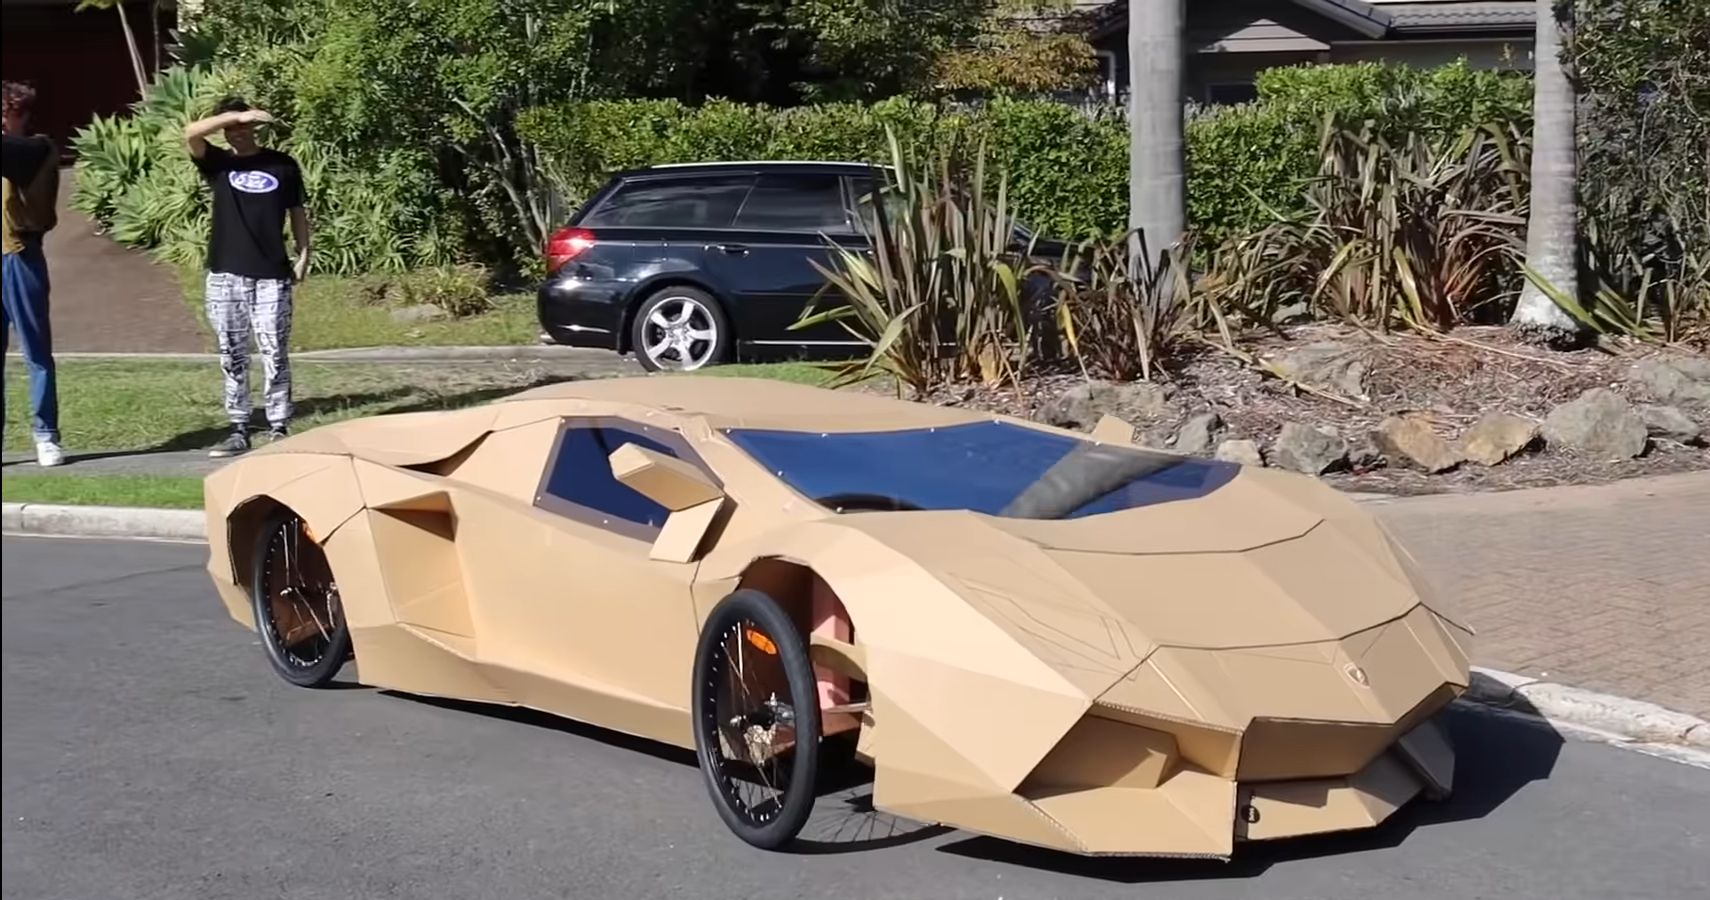 Lamborghini made of CARDBOARD sells for $10,000 after being made by a  creative Kiwi r